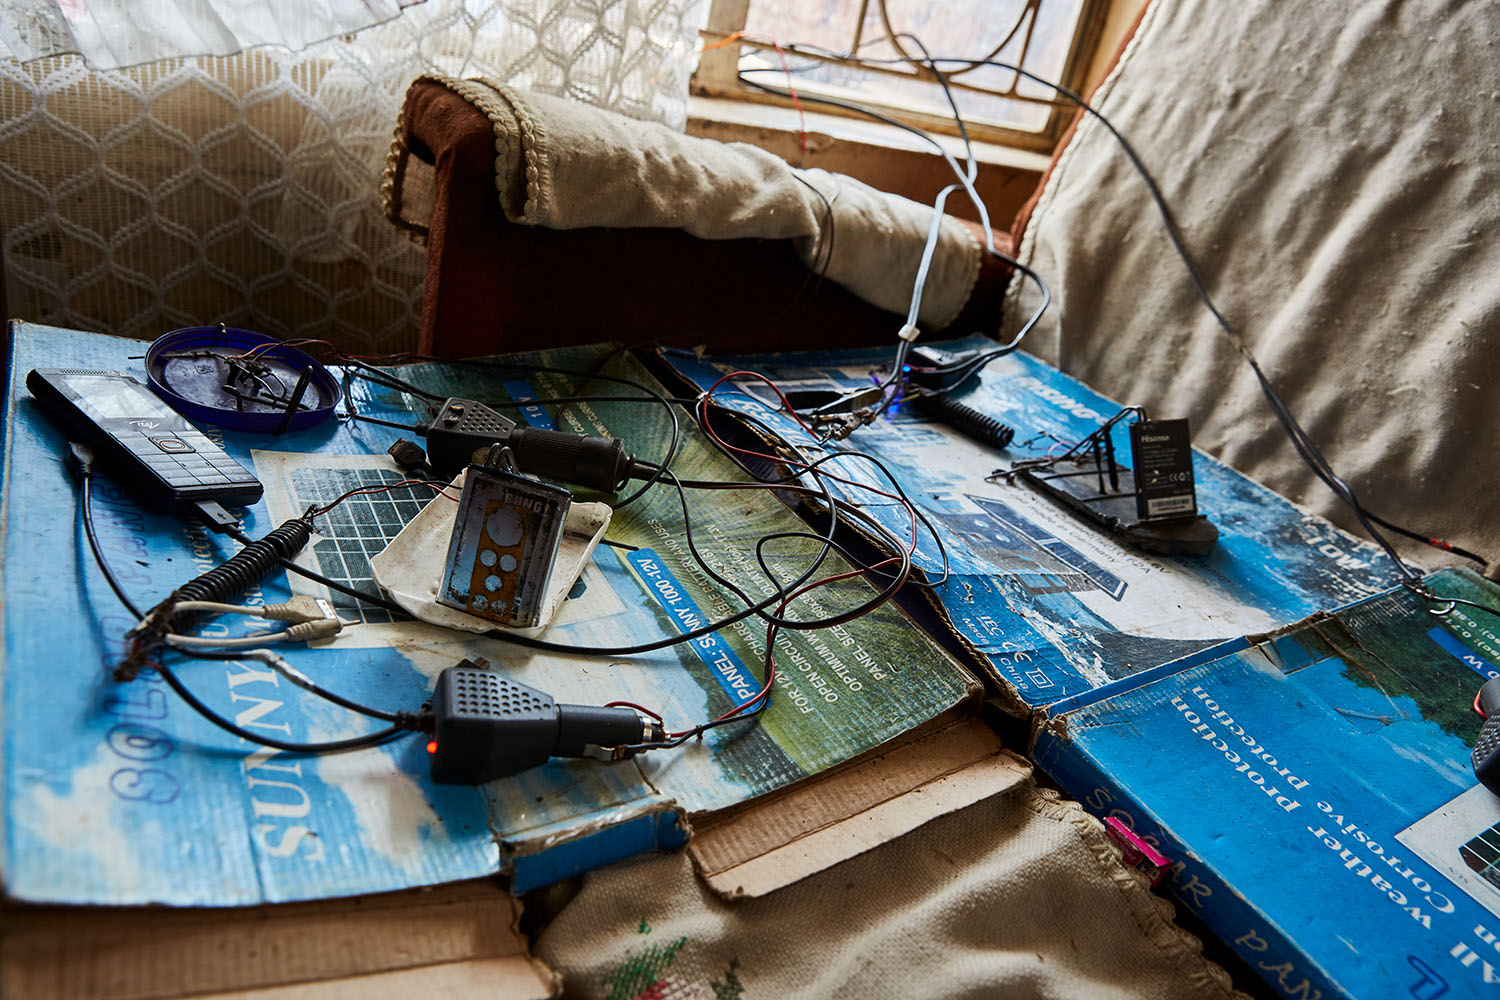  The charging station in the living room of Felix Wonga’s home, Luchenza, Malawi, 2017.  The solar panels that Felix uses for his mobile phone charging business also powers their lights, and several small radio’s and speakers. Felix: “We are the only